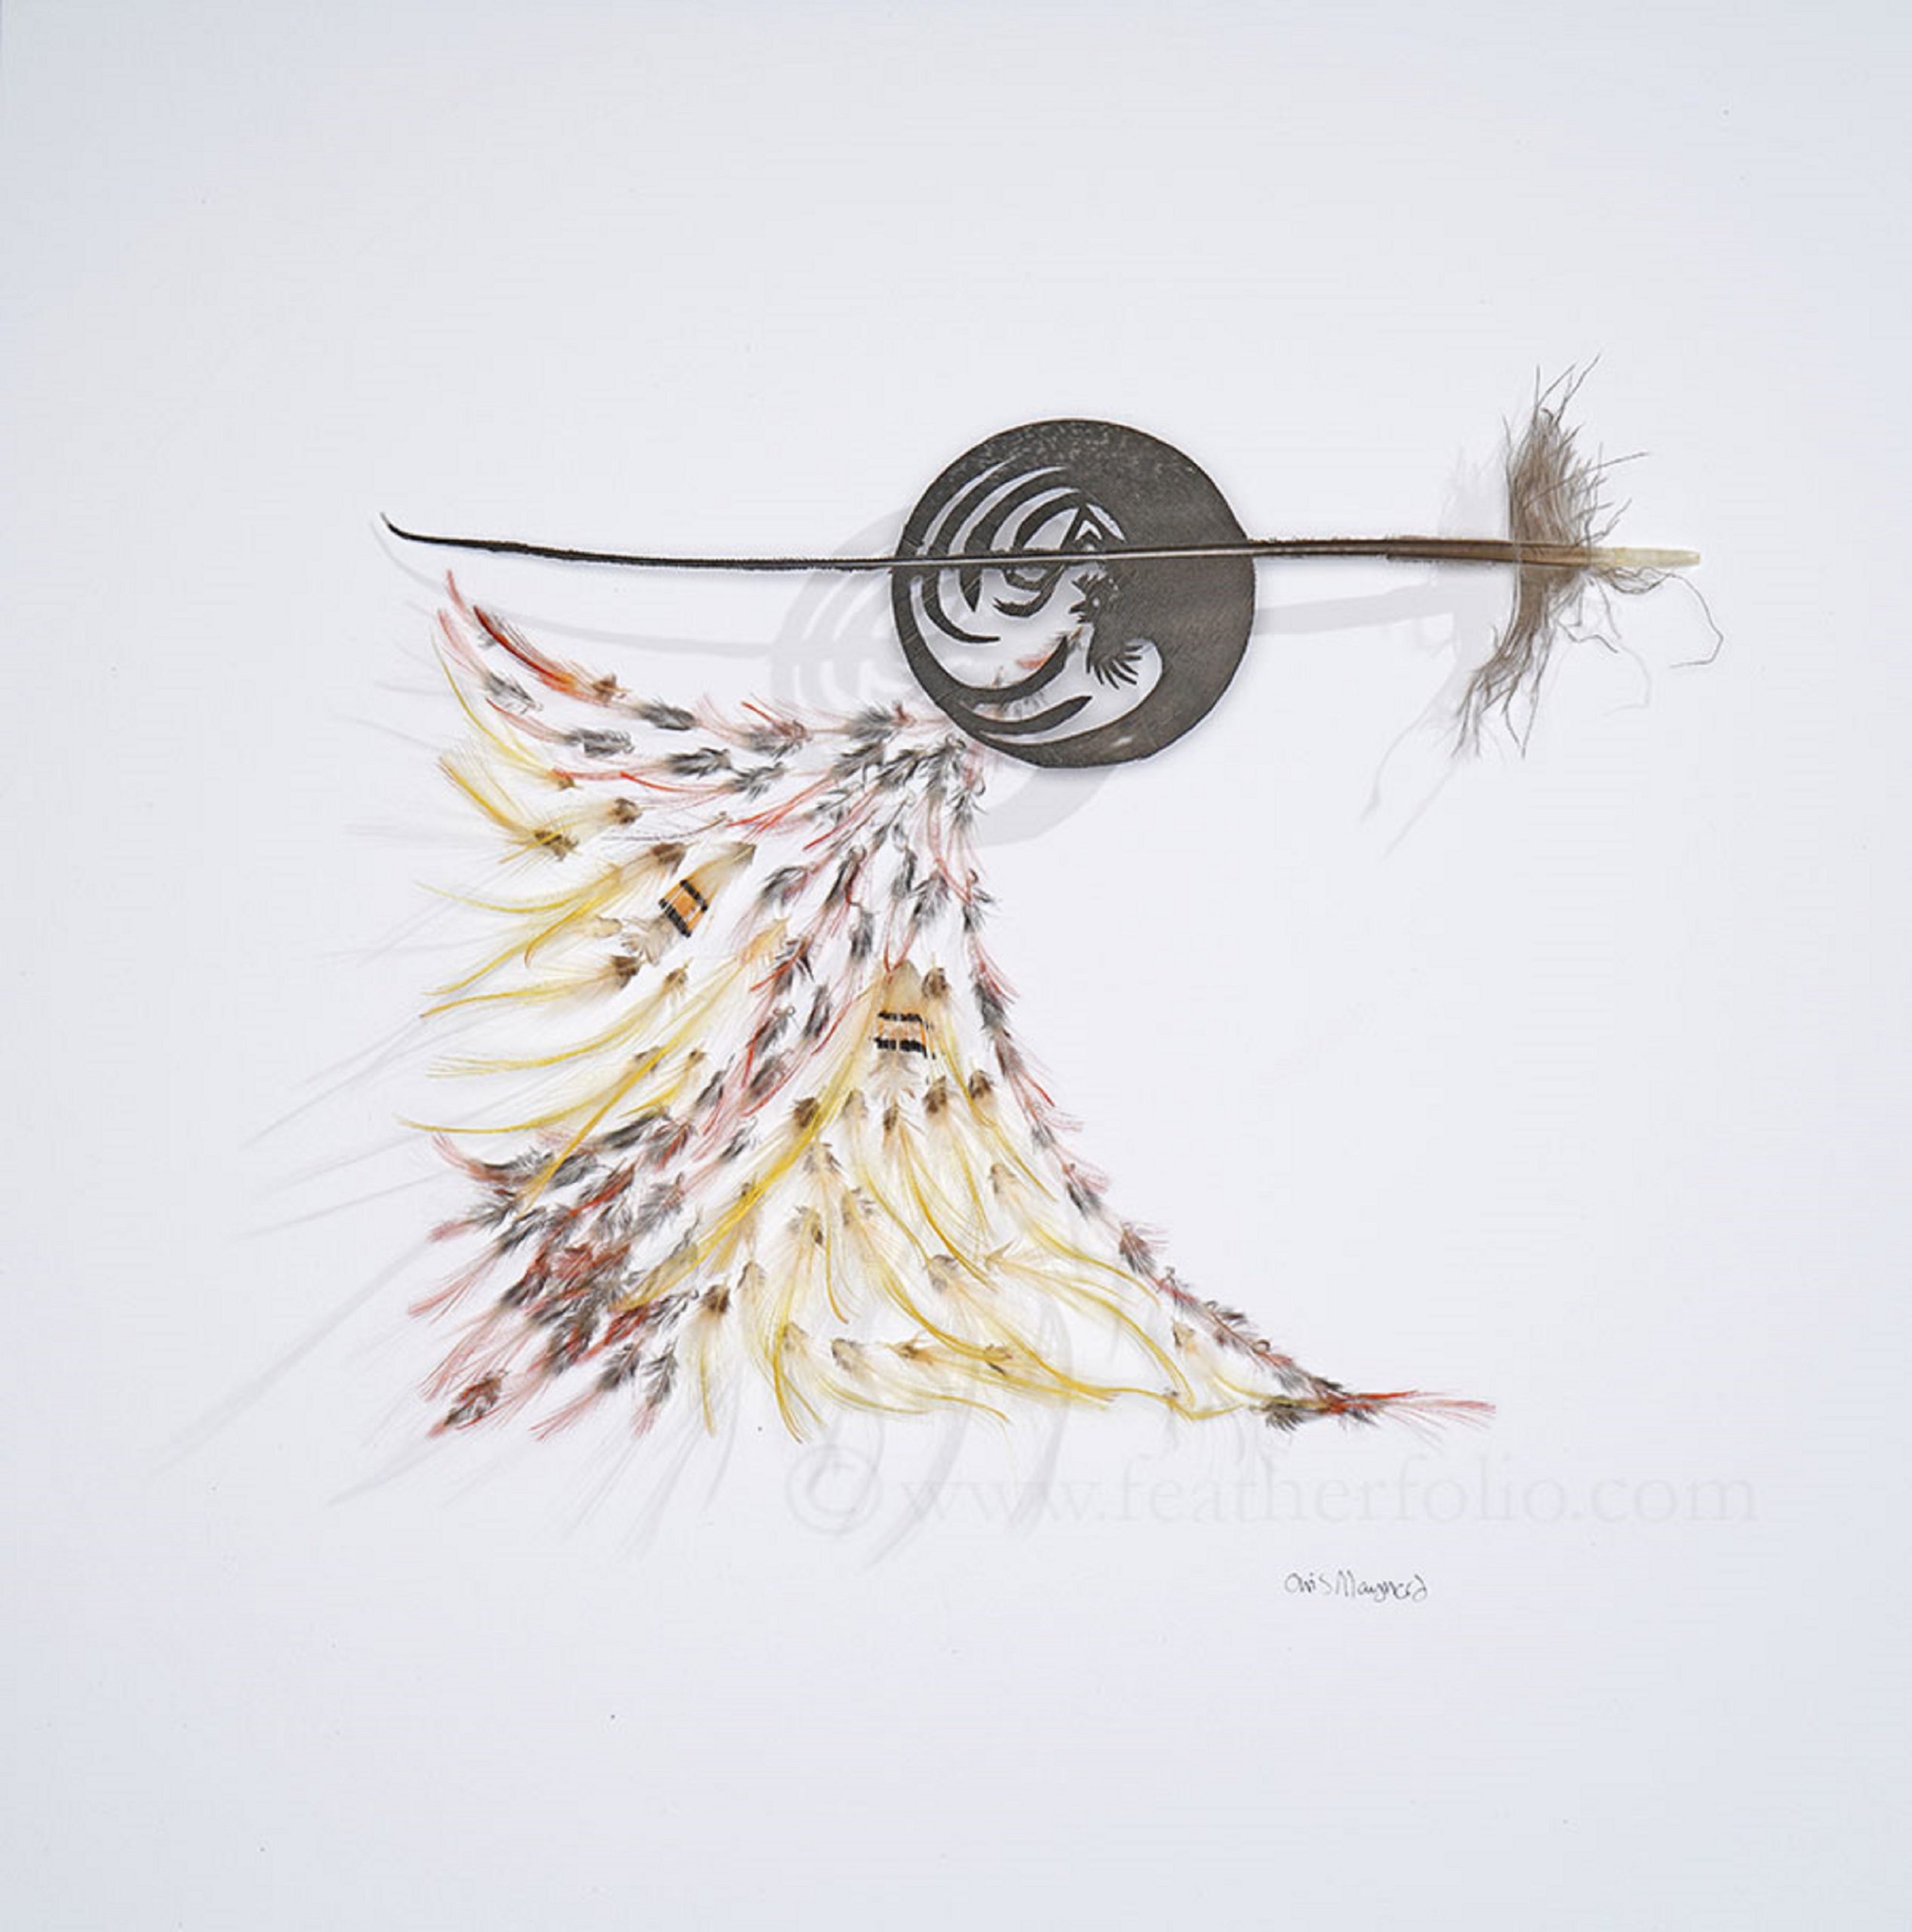 

											Chris Maynard</b>

											<em>
												Chris Maynard: New Works</em> 

											<h4>
												Currently on view through April 1, 2022											</h4>

		                																																													<i>Rooster Tunes,</i>  
																																																					turkey feathers and golden pheasant and lady amherst feathers, 
																																								12 x 12 inches 
																								
		                				